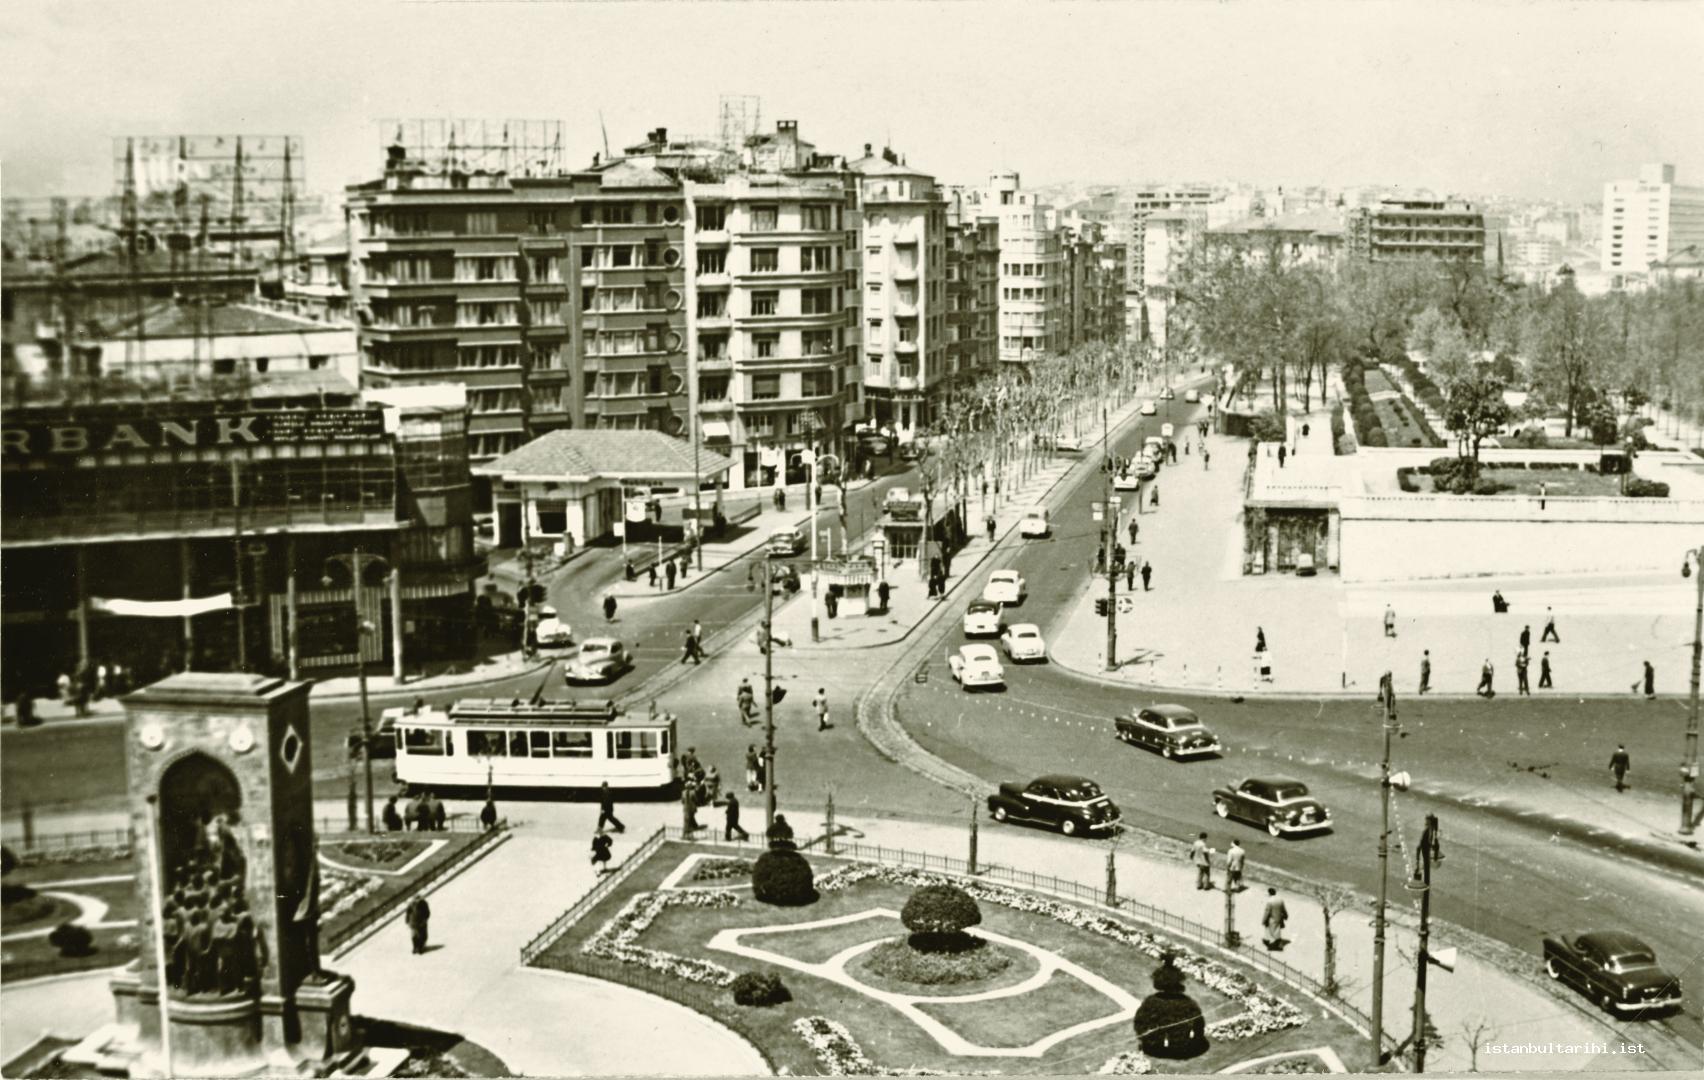 5- Taksim Square and Gezi Park the former name of which was İnönü Gezisi. The word “gezi” has actually been created in place of the word “park,” therefore there is a weird    situation in the construction of “Gezi Park.” Since there is a big space around Gezi Park, the photograph might have been taken in the 1940s.